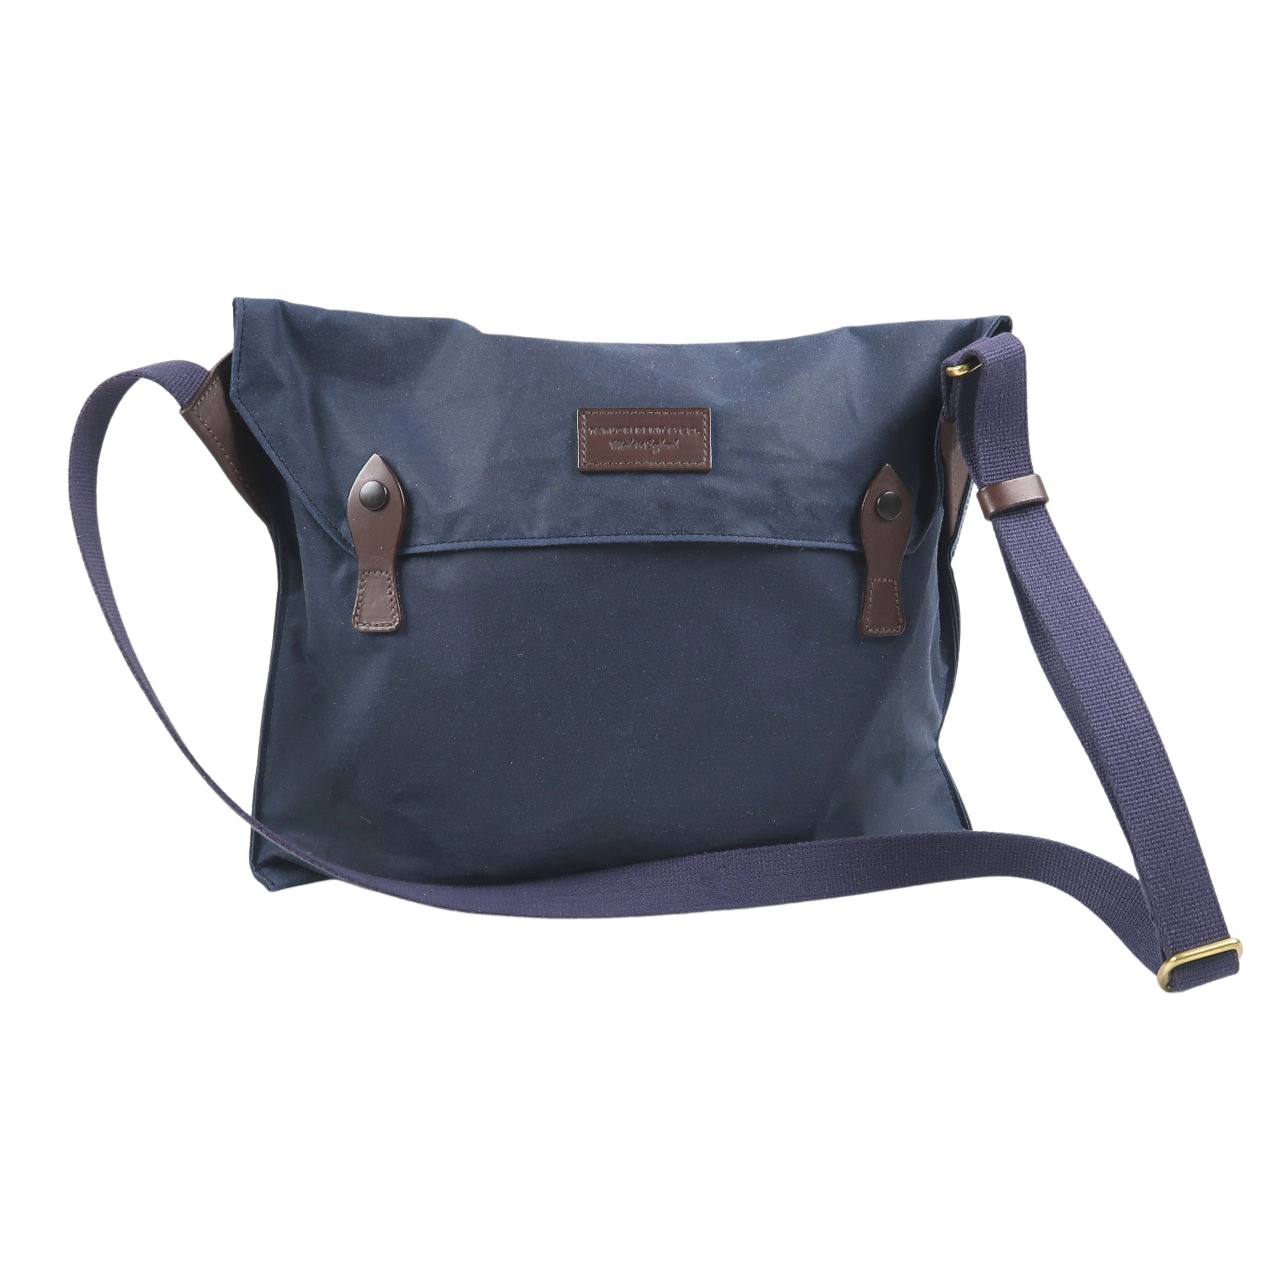 Taylor Kent Musette - Waxed Cotton Bag - Navy